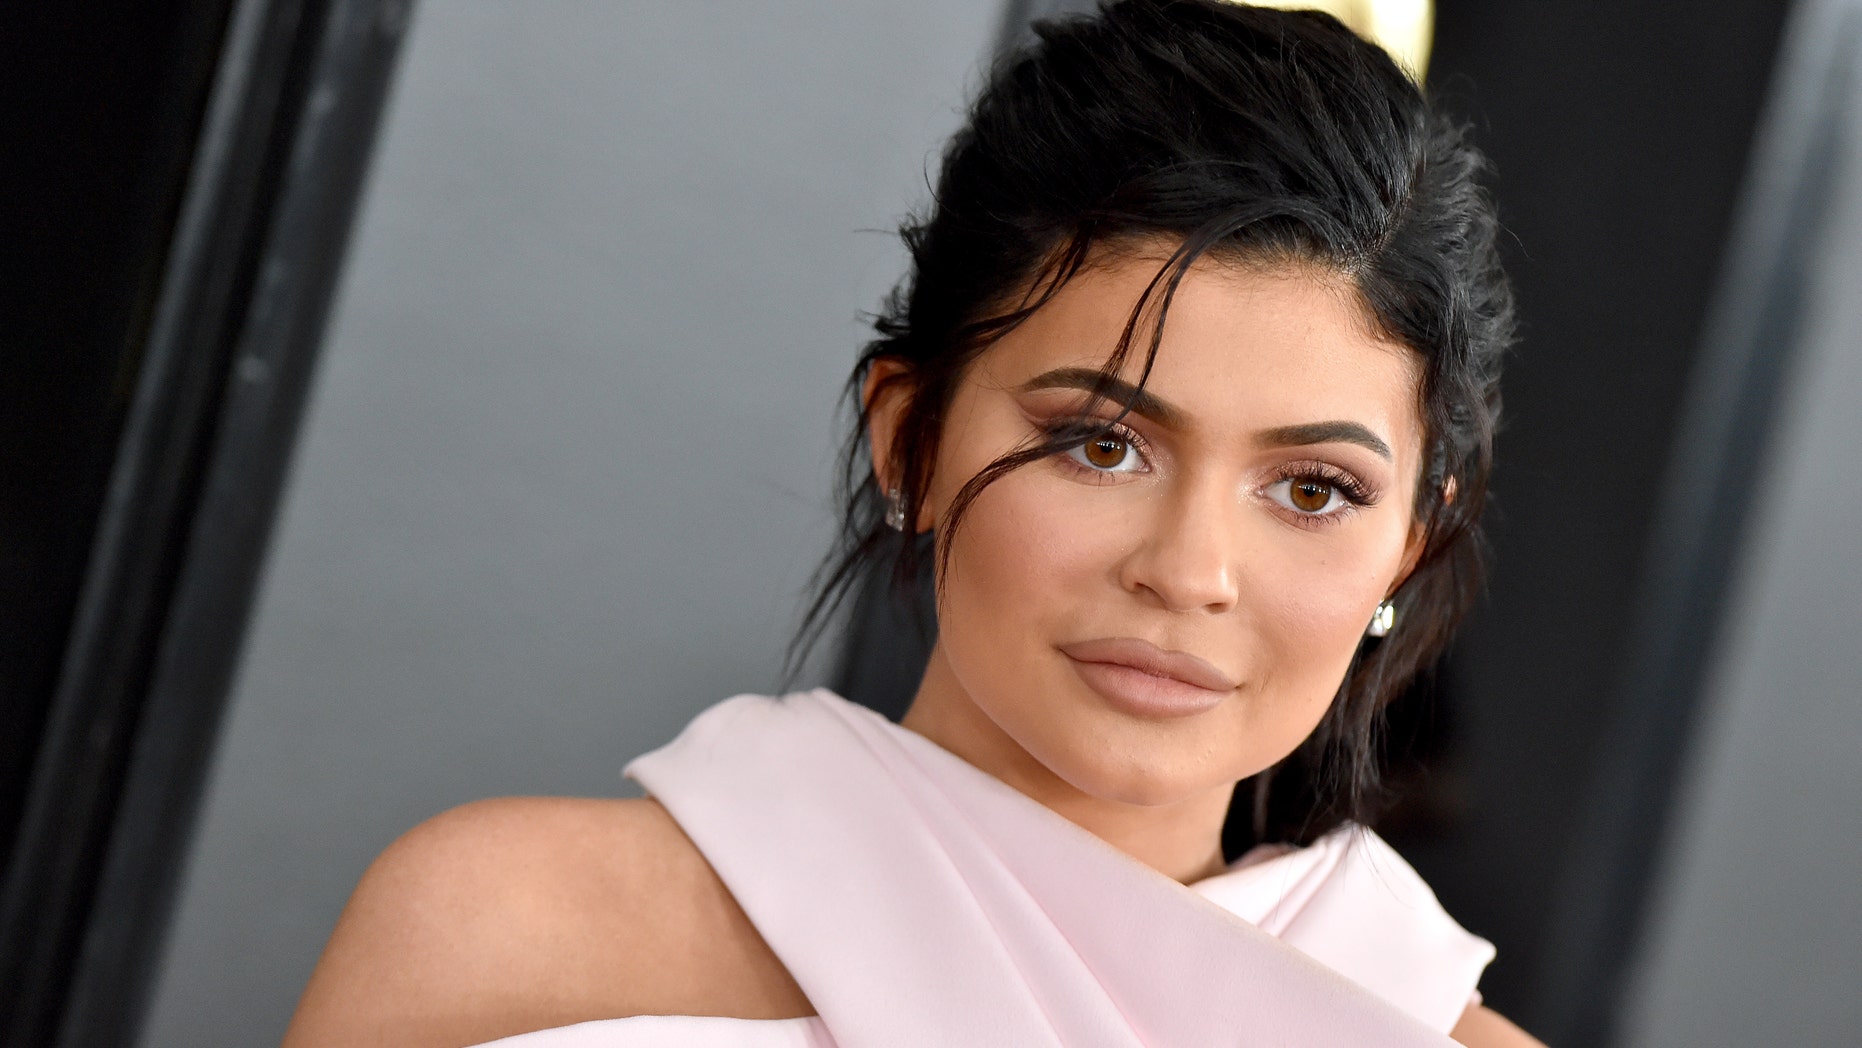 kylie jenner attends the 61st annual grammy awards at staples center on february 10 2019 - instagram weird followers